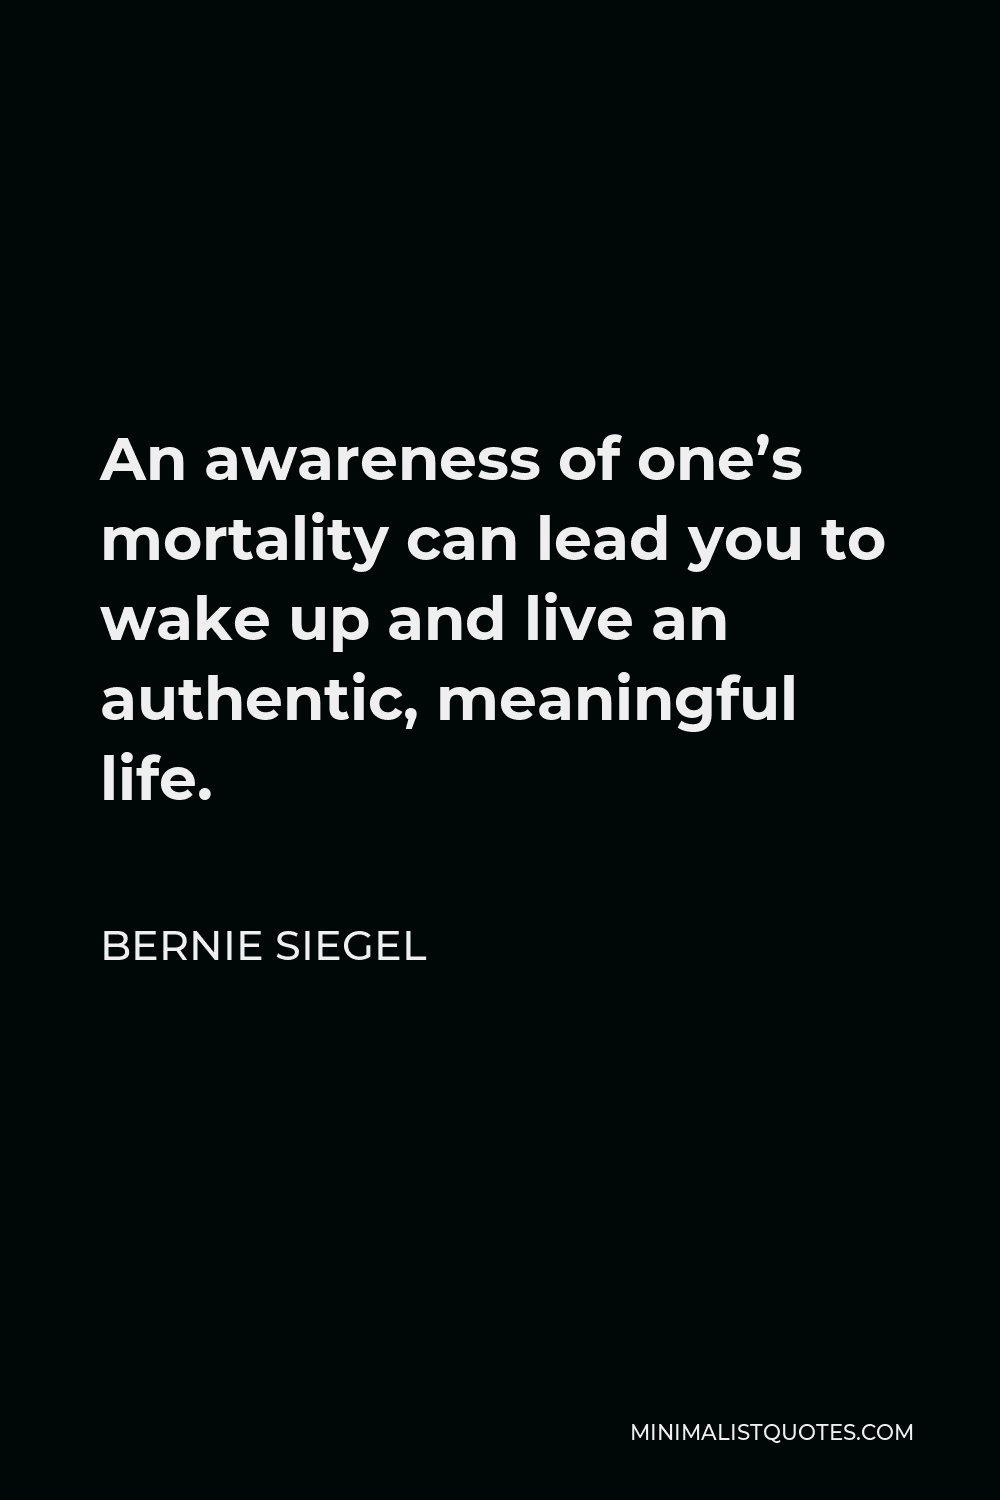 Bernie Siegel Quote - An awareness of one’s mortality can lead you to wake up and live an authentic, meaningful life.